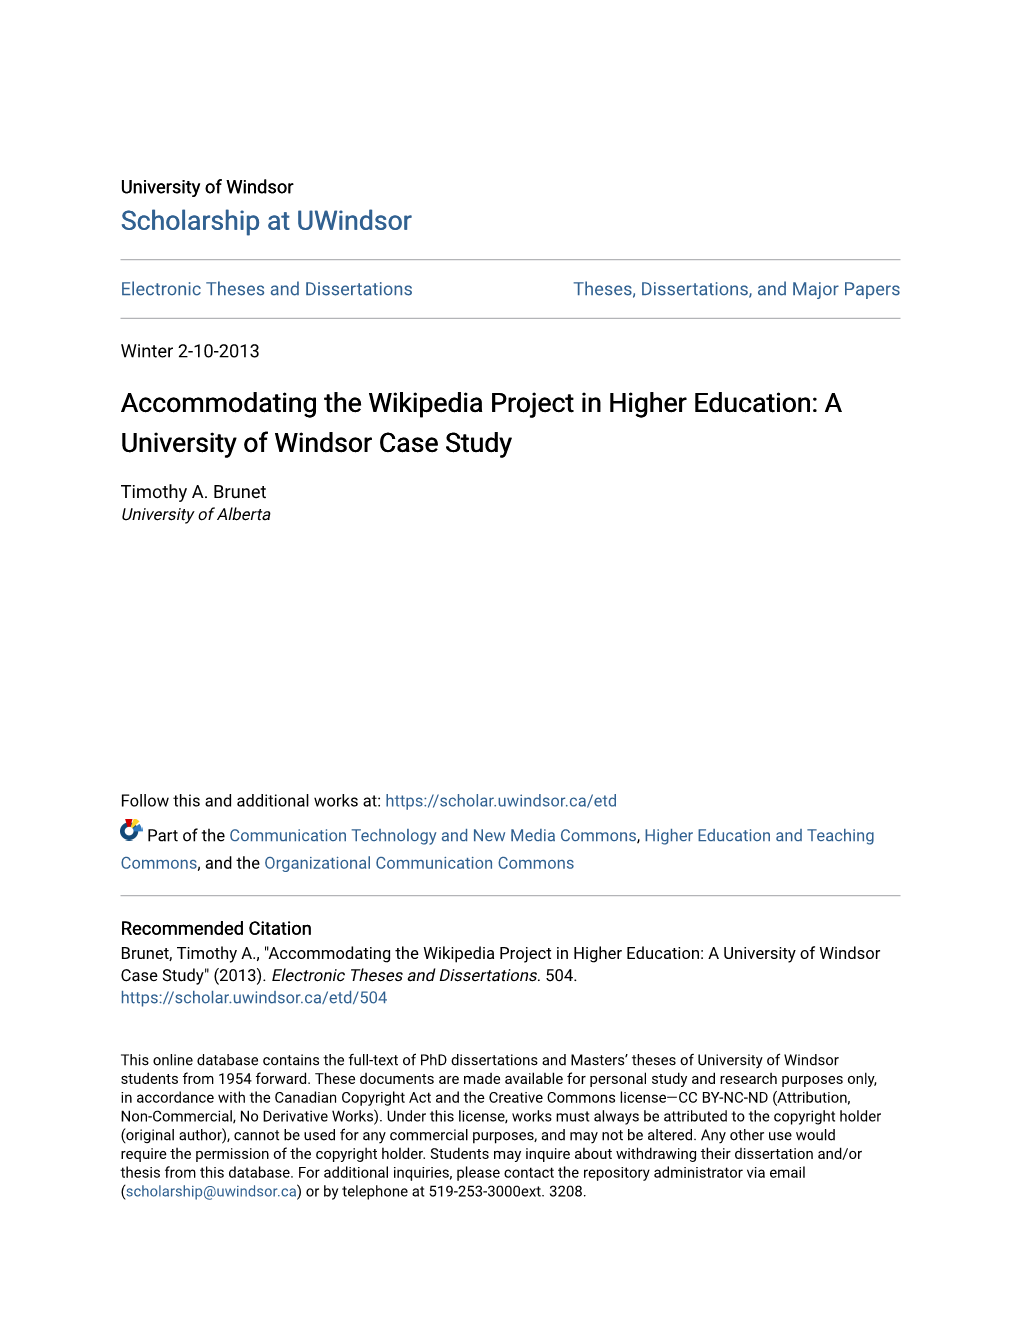 Accommodating the Wikipedia Project in Higher Education: a University of Windsor Case Study